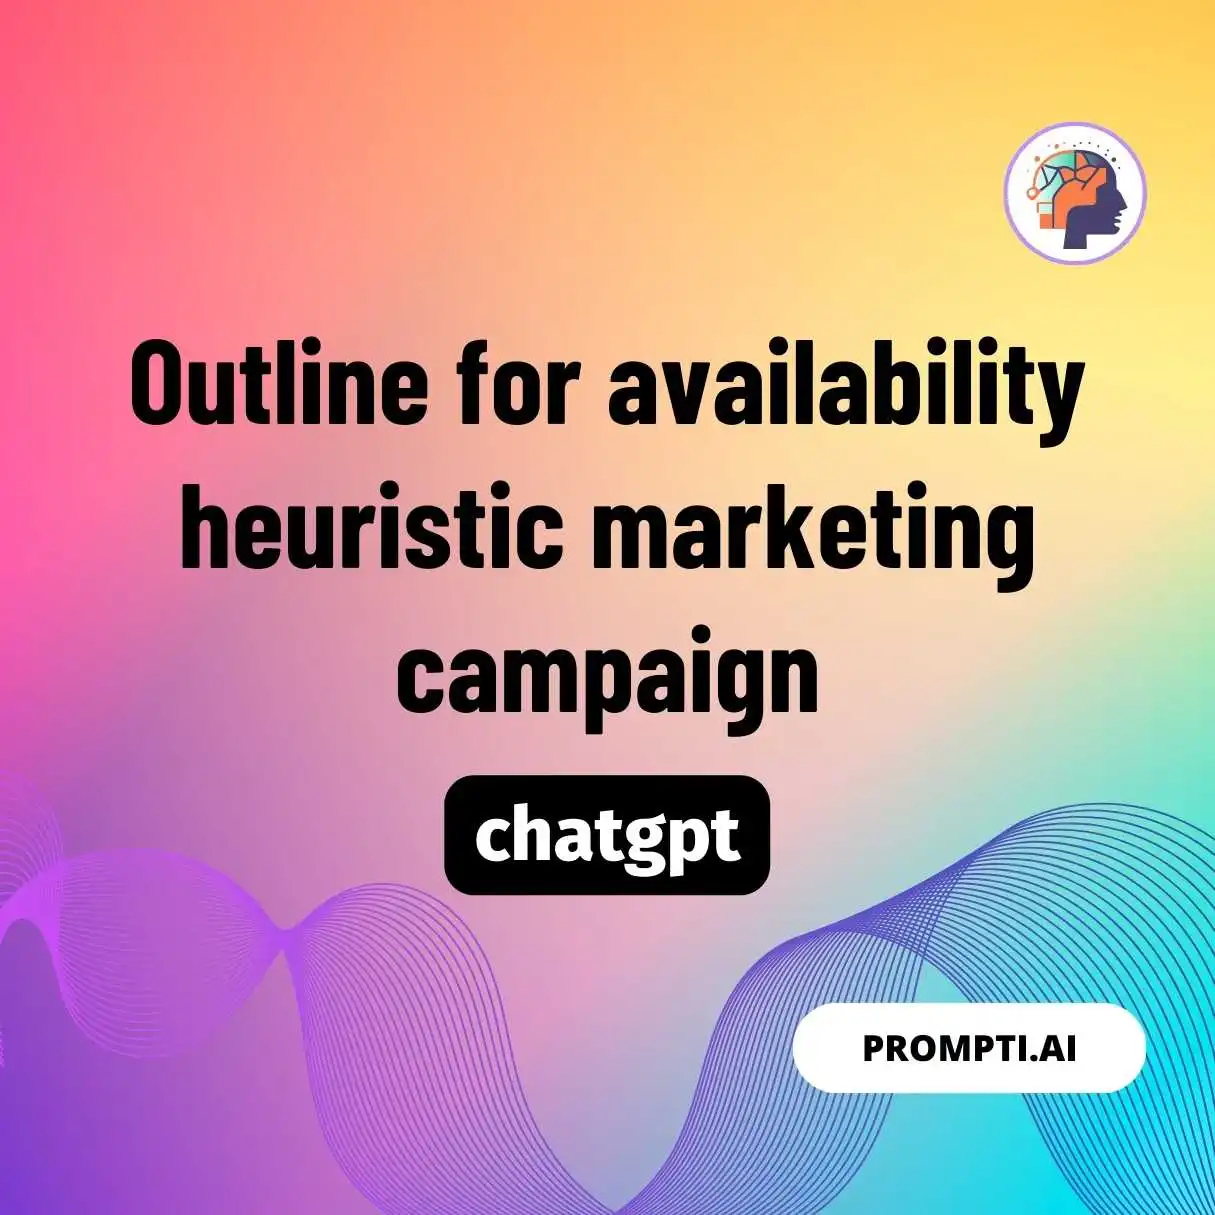 Outline for availability heuristic marketing campaign